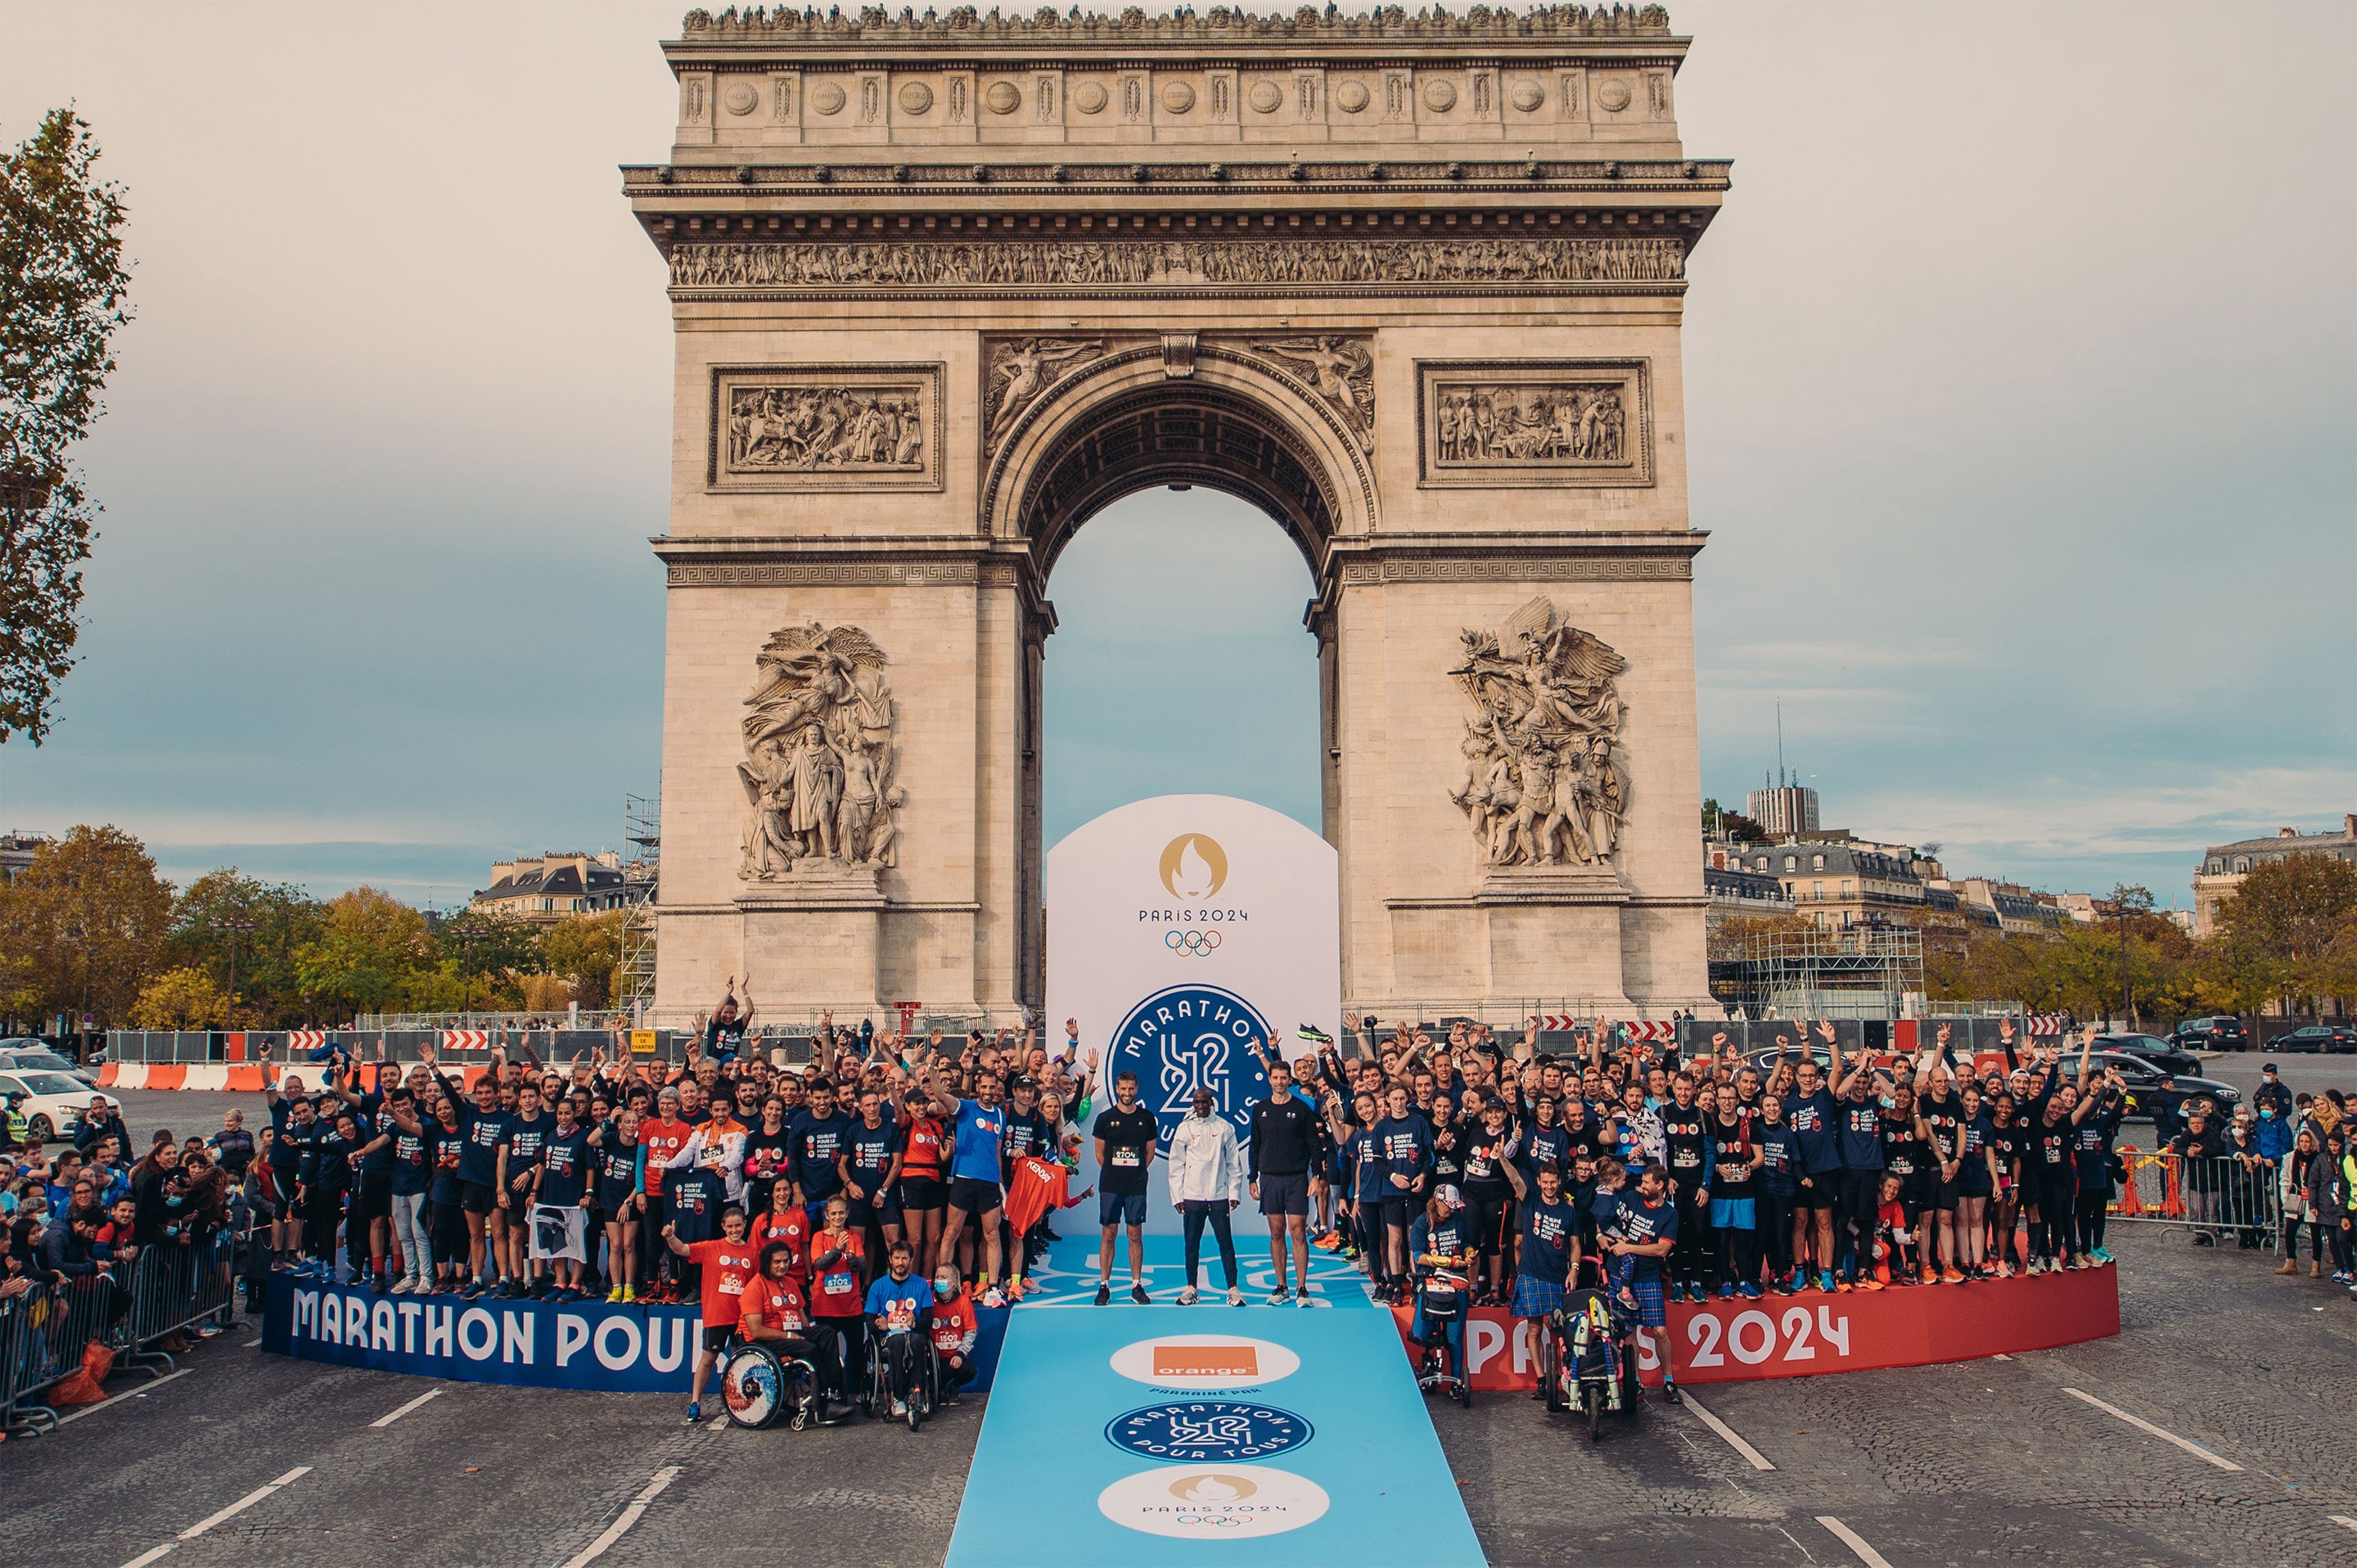 The Champs-Élysées - On Location Olympic and Paralympic Games Paris 2024